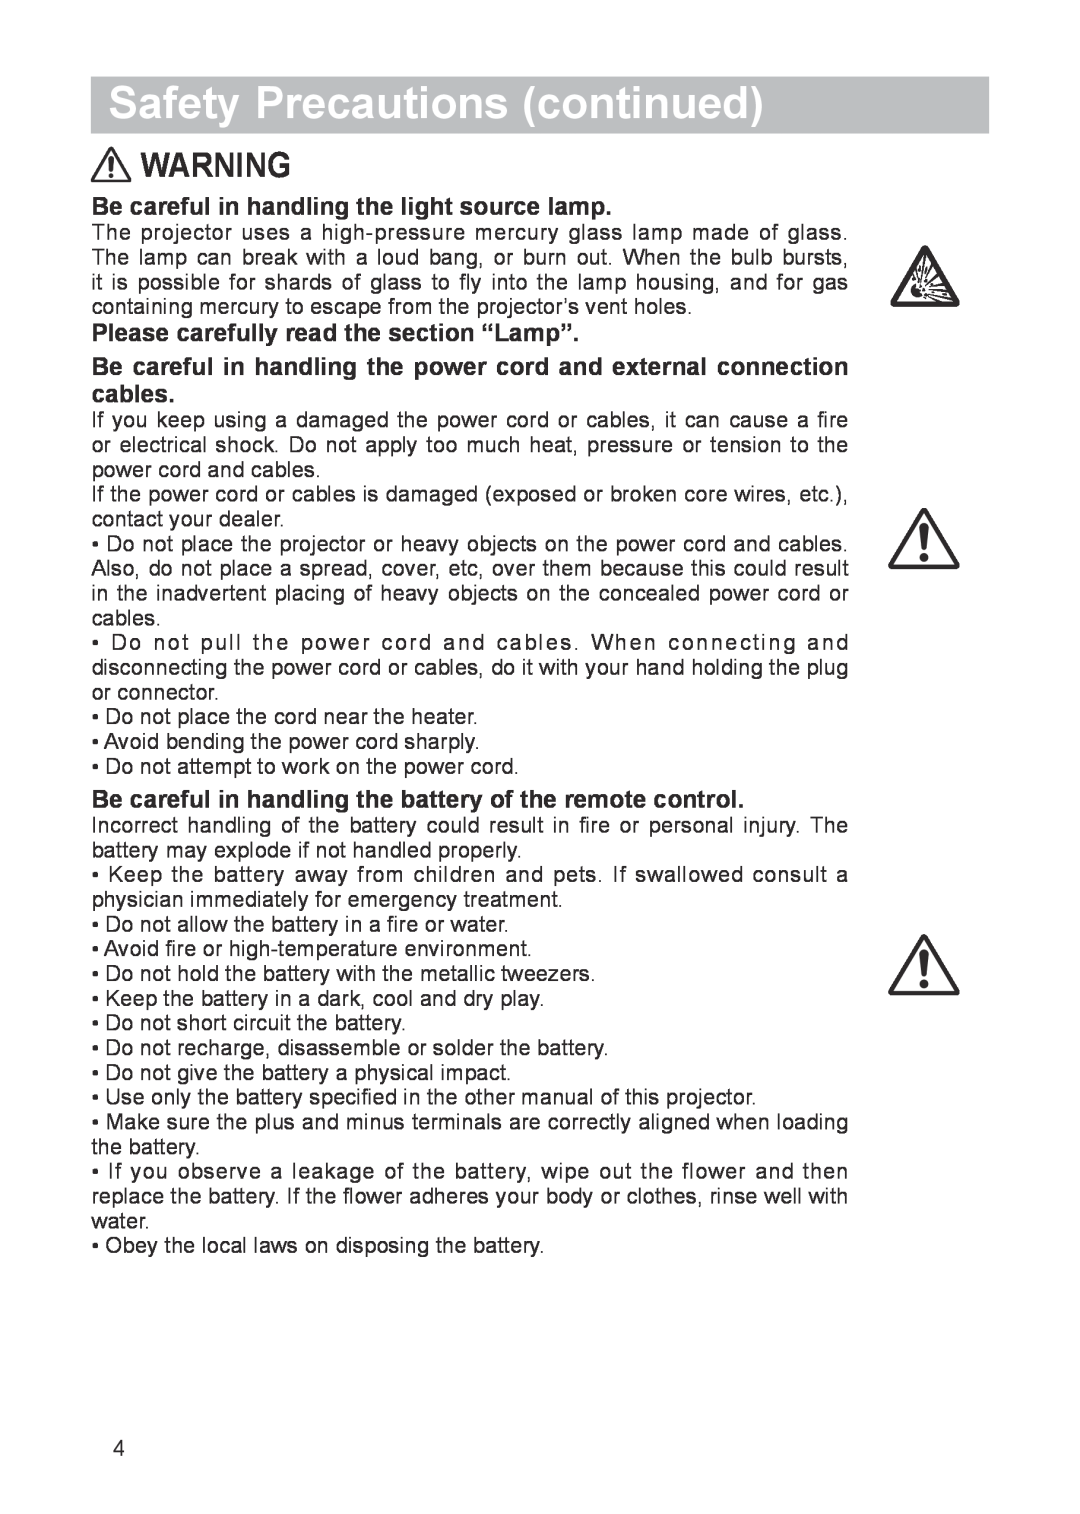 Dukane 8763 user manual Be careful in handling the light source lamp, Please carefully read the section “Lamp” 